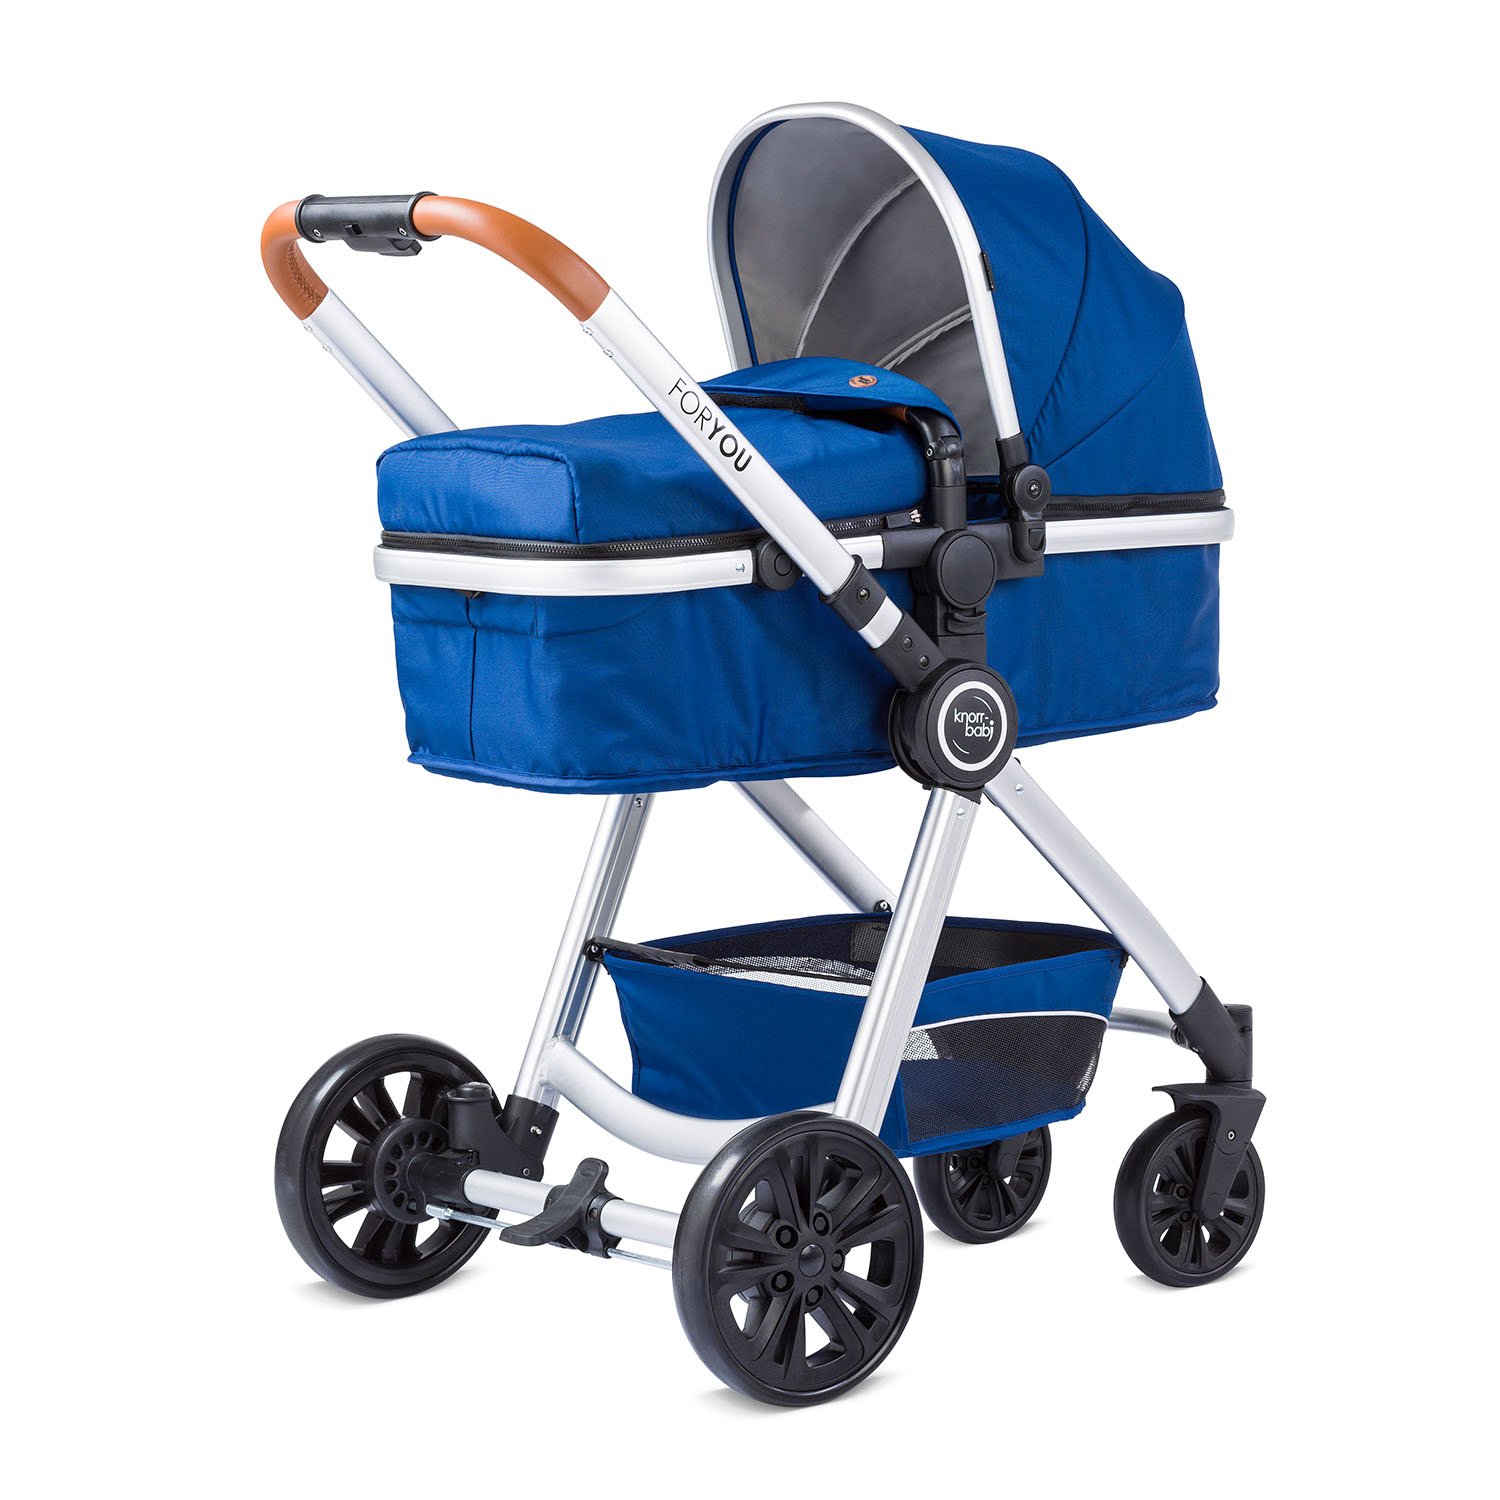 Knorr-Baby Nizza 860602 Combination Pram for you blue